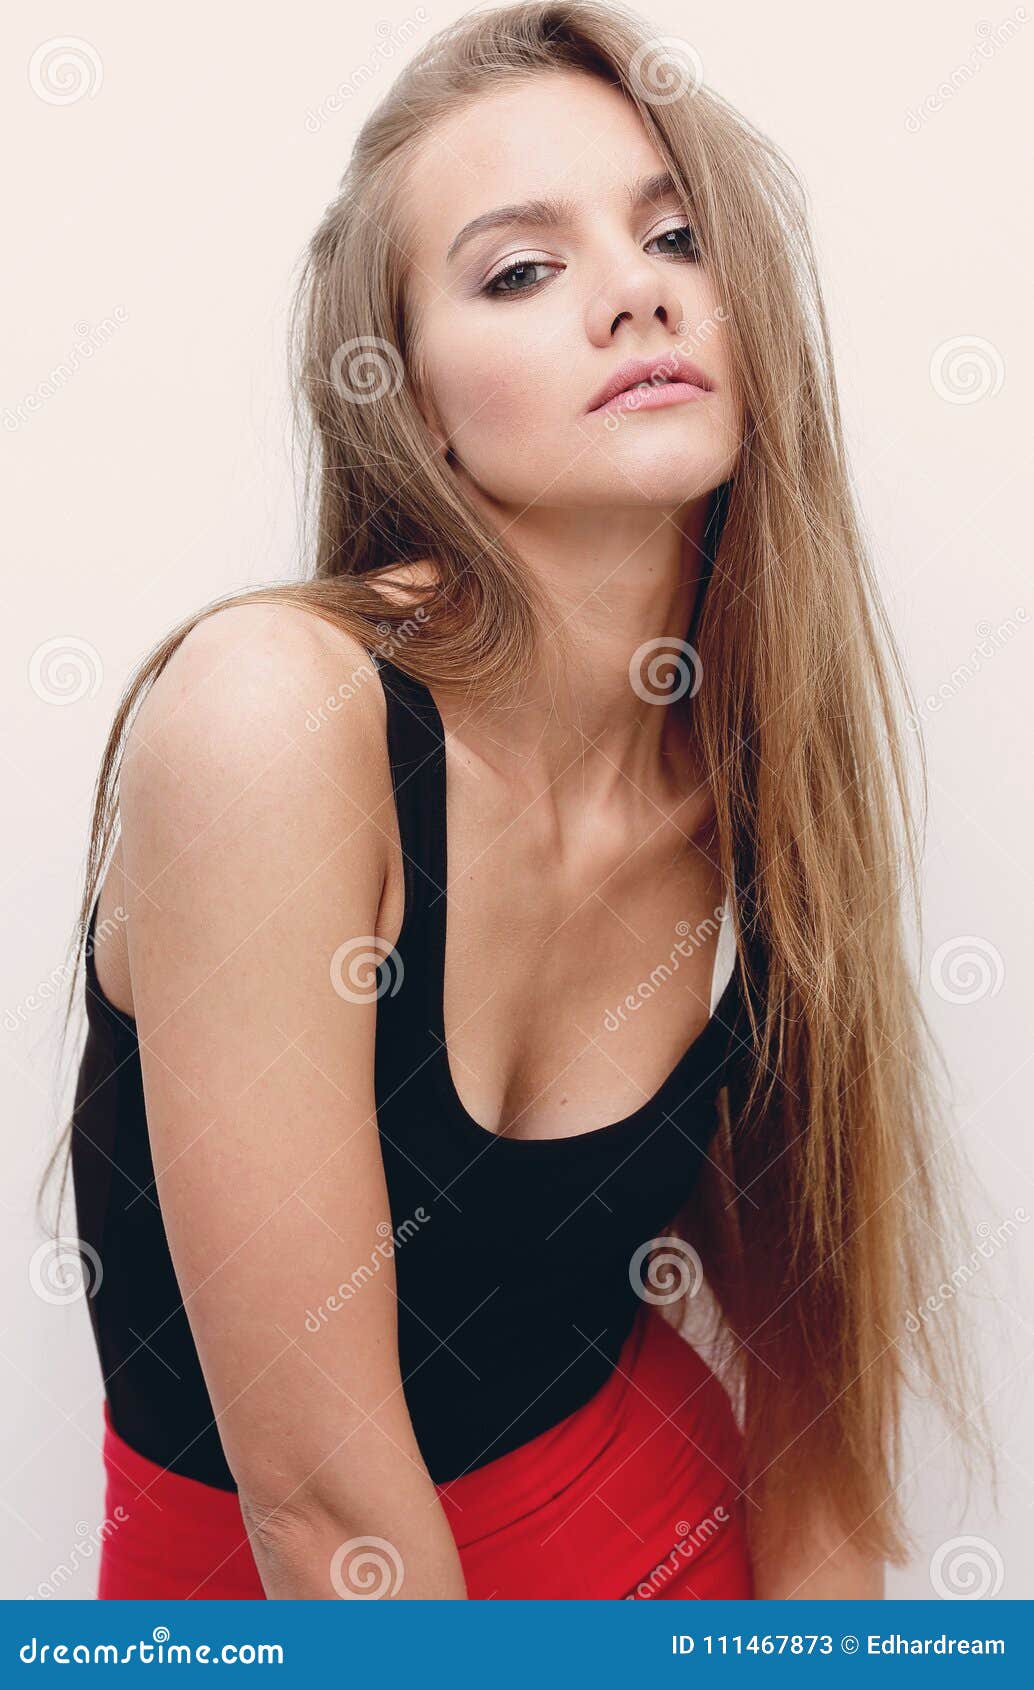 Girl Model Posing for the Camera Stock Image - Image of eyes, face ...